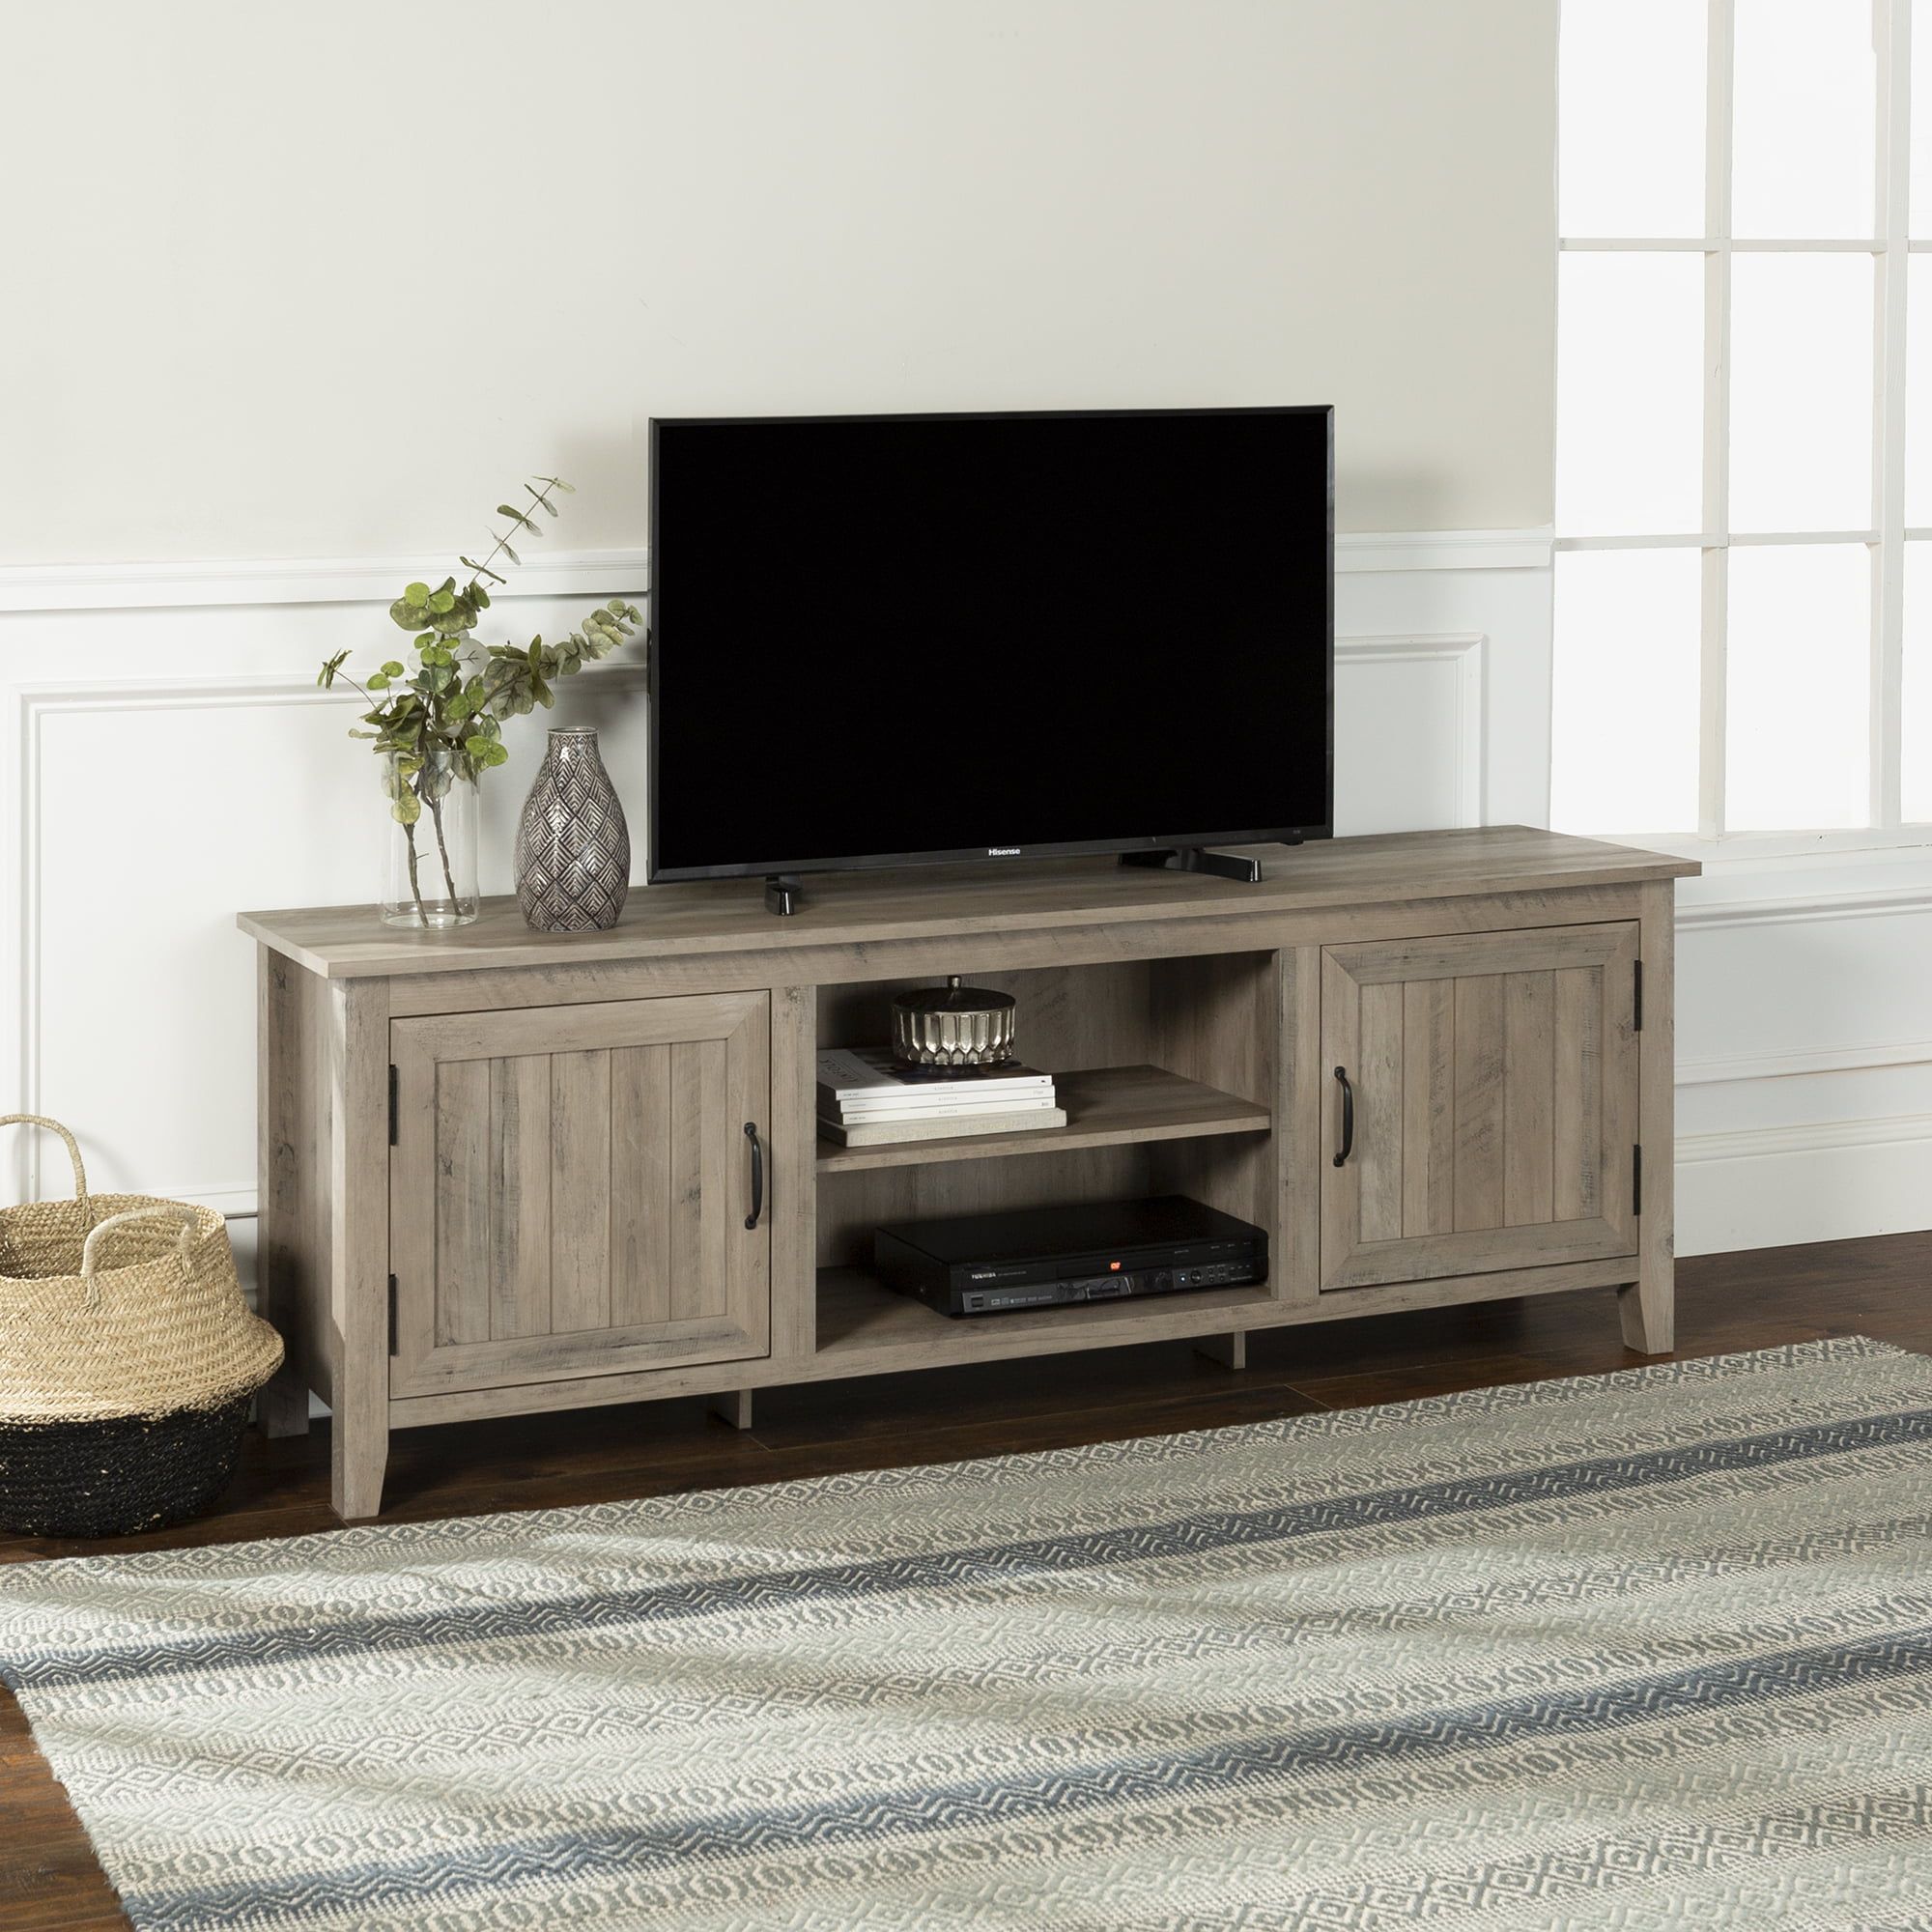 Manor Park Modern Farmhouse Tv Stand For Tvs Up To 80", Grey Wash Intended For Farmhouse Stands For Tvs (View 18 of 20)